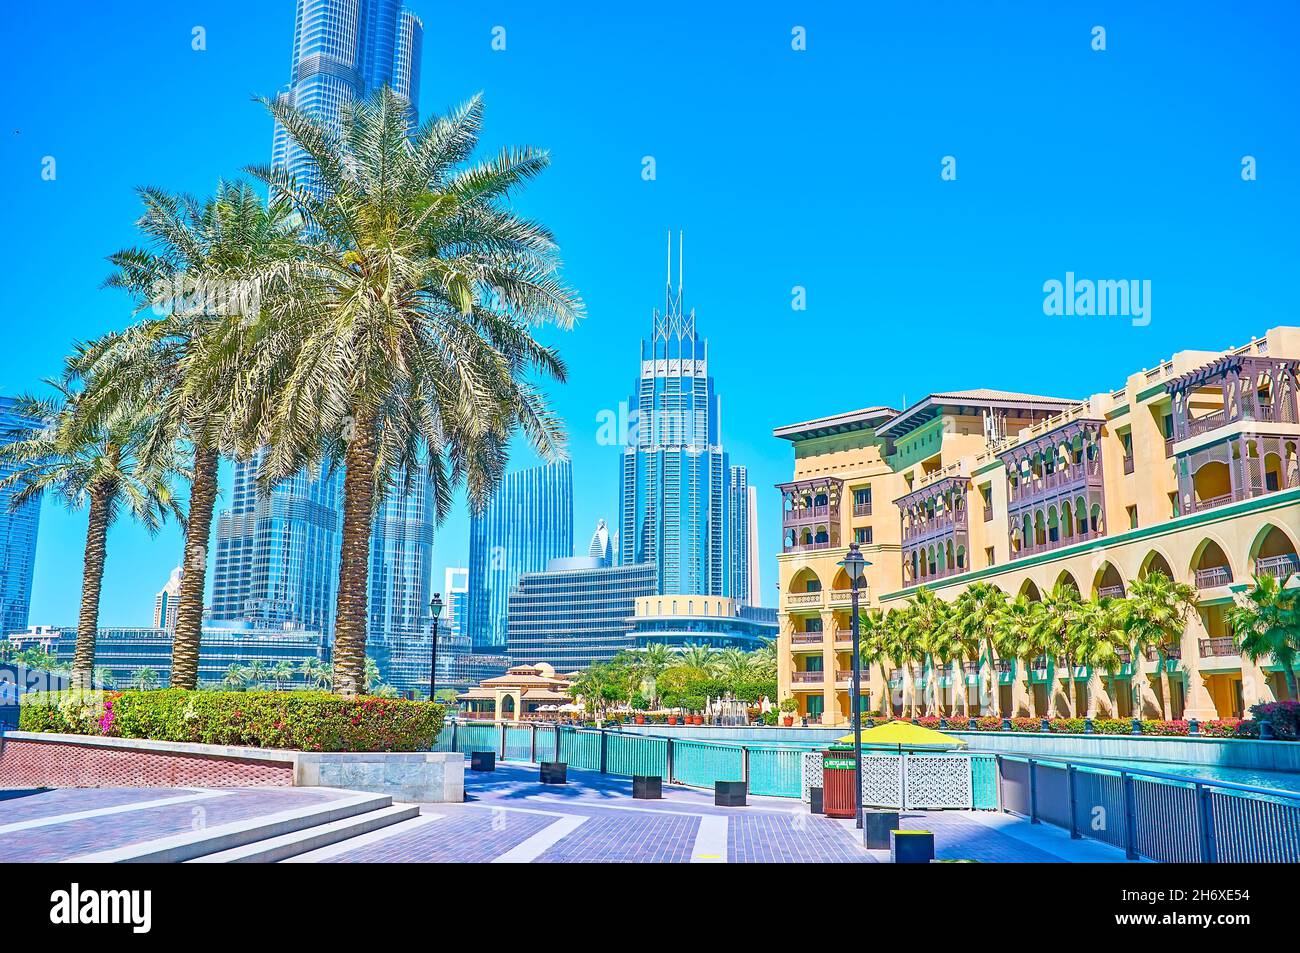 The pleasant walk along the bank of Burj Khalifa Lake and enjoy great traditional Arabic architecture of Old Town Island complex with palm trees and h Stock Photo